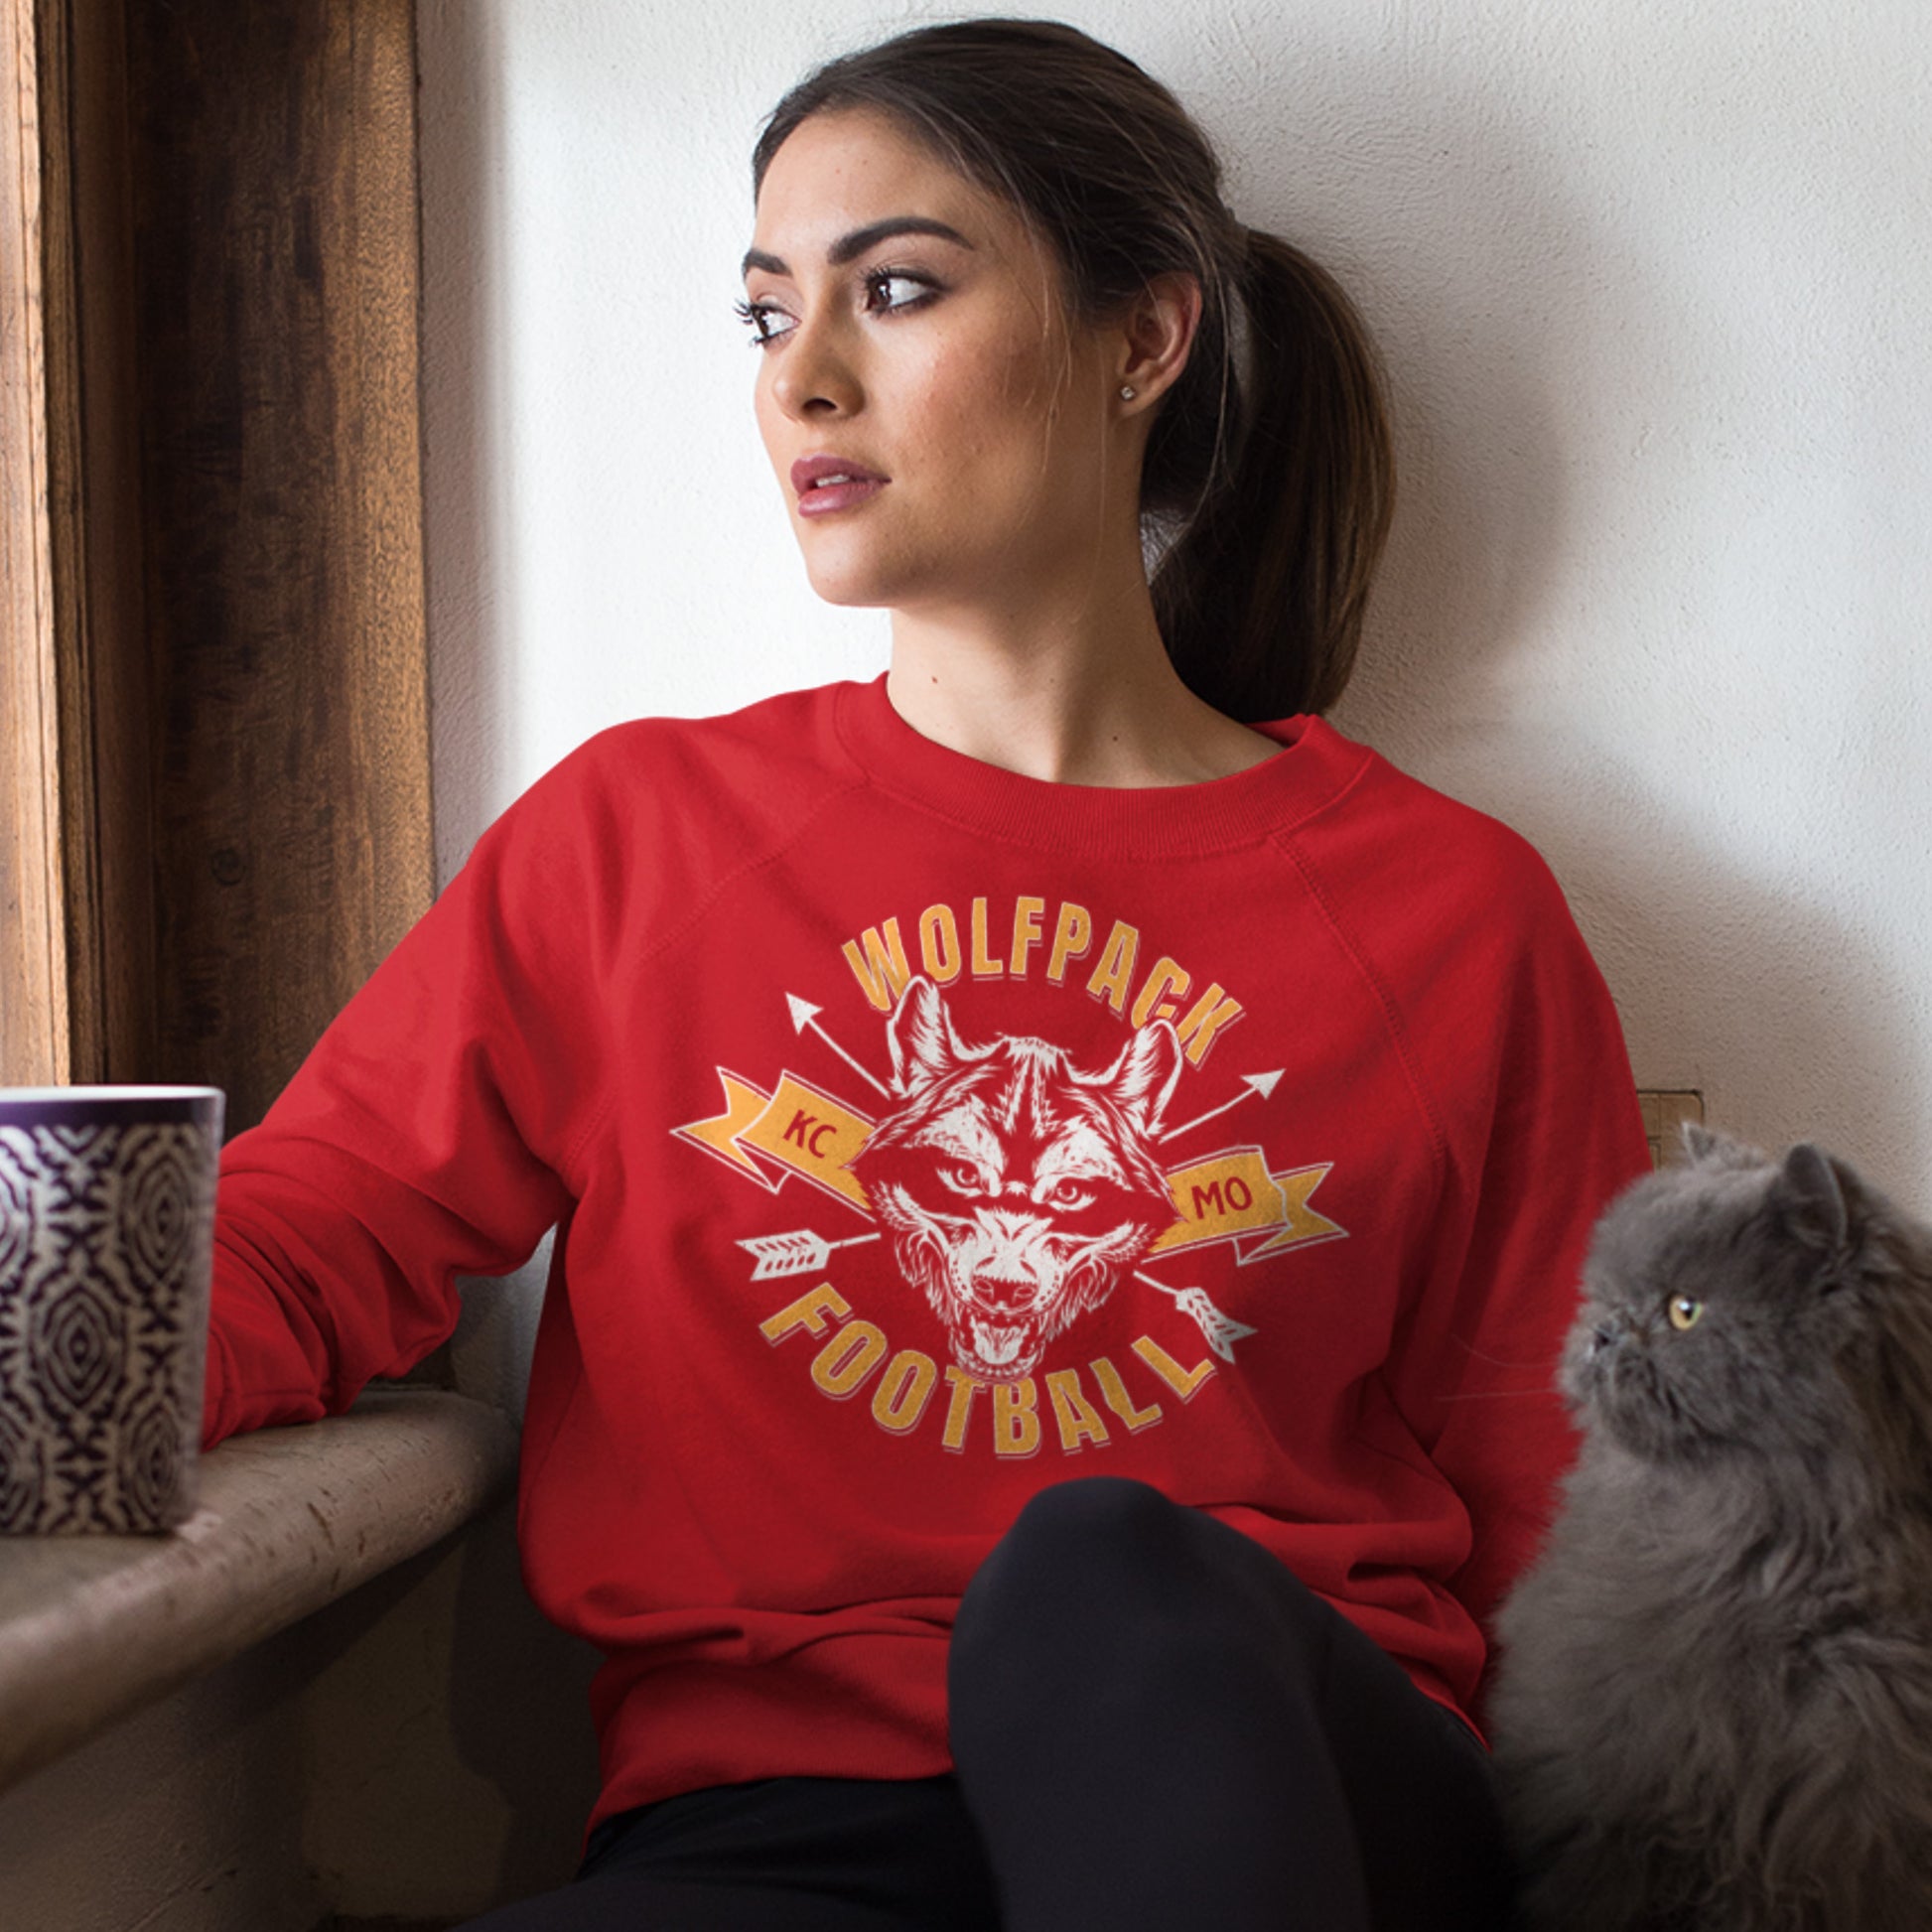 KC Swag Kansas City Chiefs Distressed White & Gold Wolfpack Football on a Red Crewneck Sweatshirt worn by a female model with a mug staring out the window with her cat